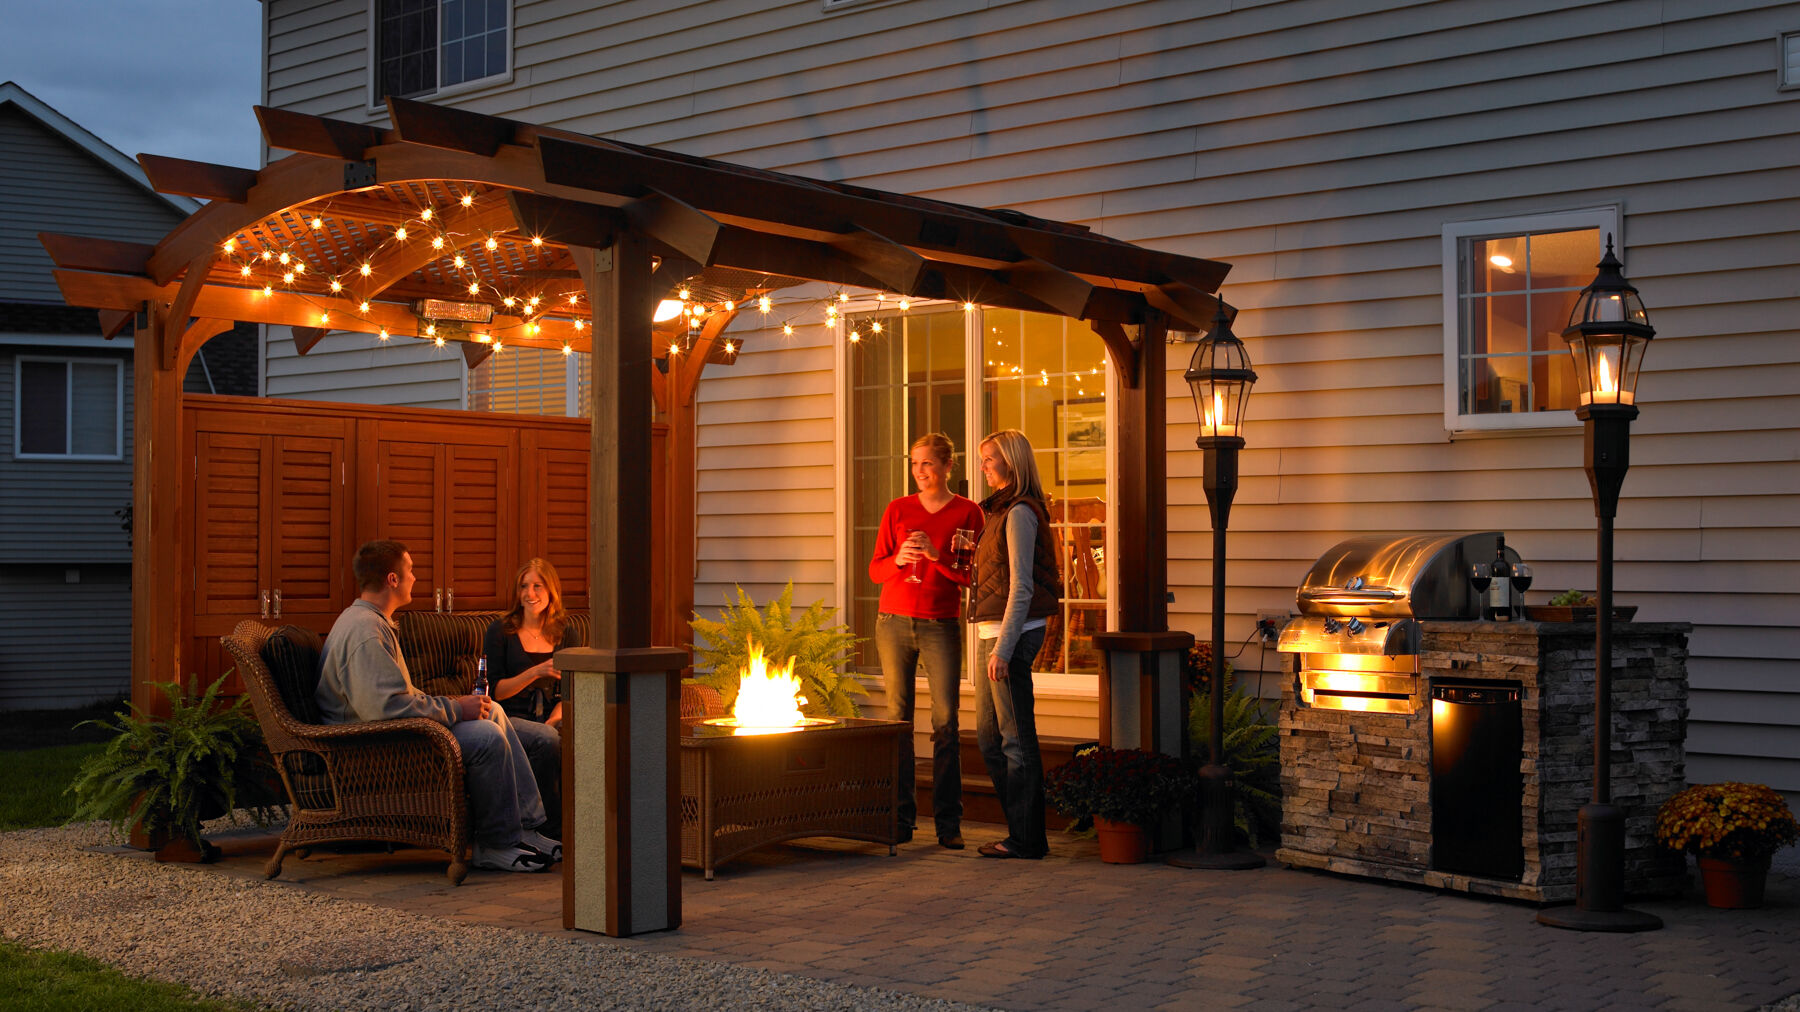 A group of people gathered on an outdoor patio at night with a wooden gazebo, a gas fire pit, an outdoor kitchen island and grill, and tiki torches.